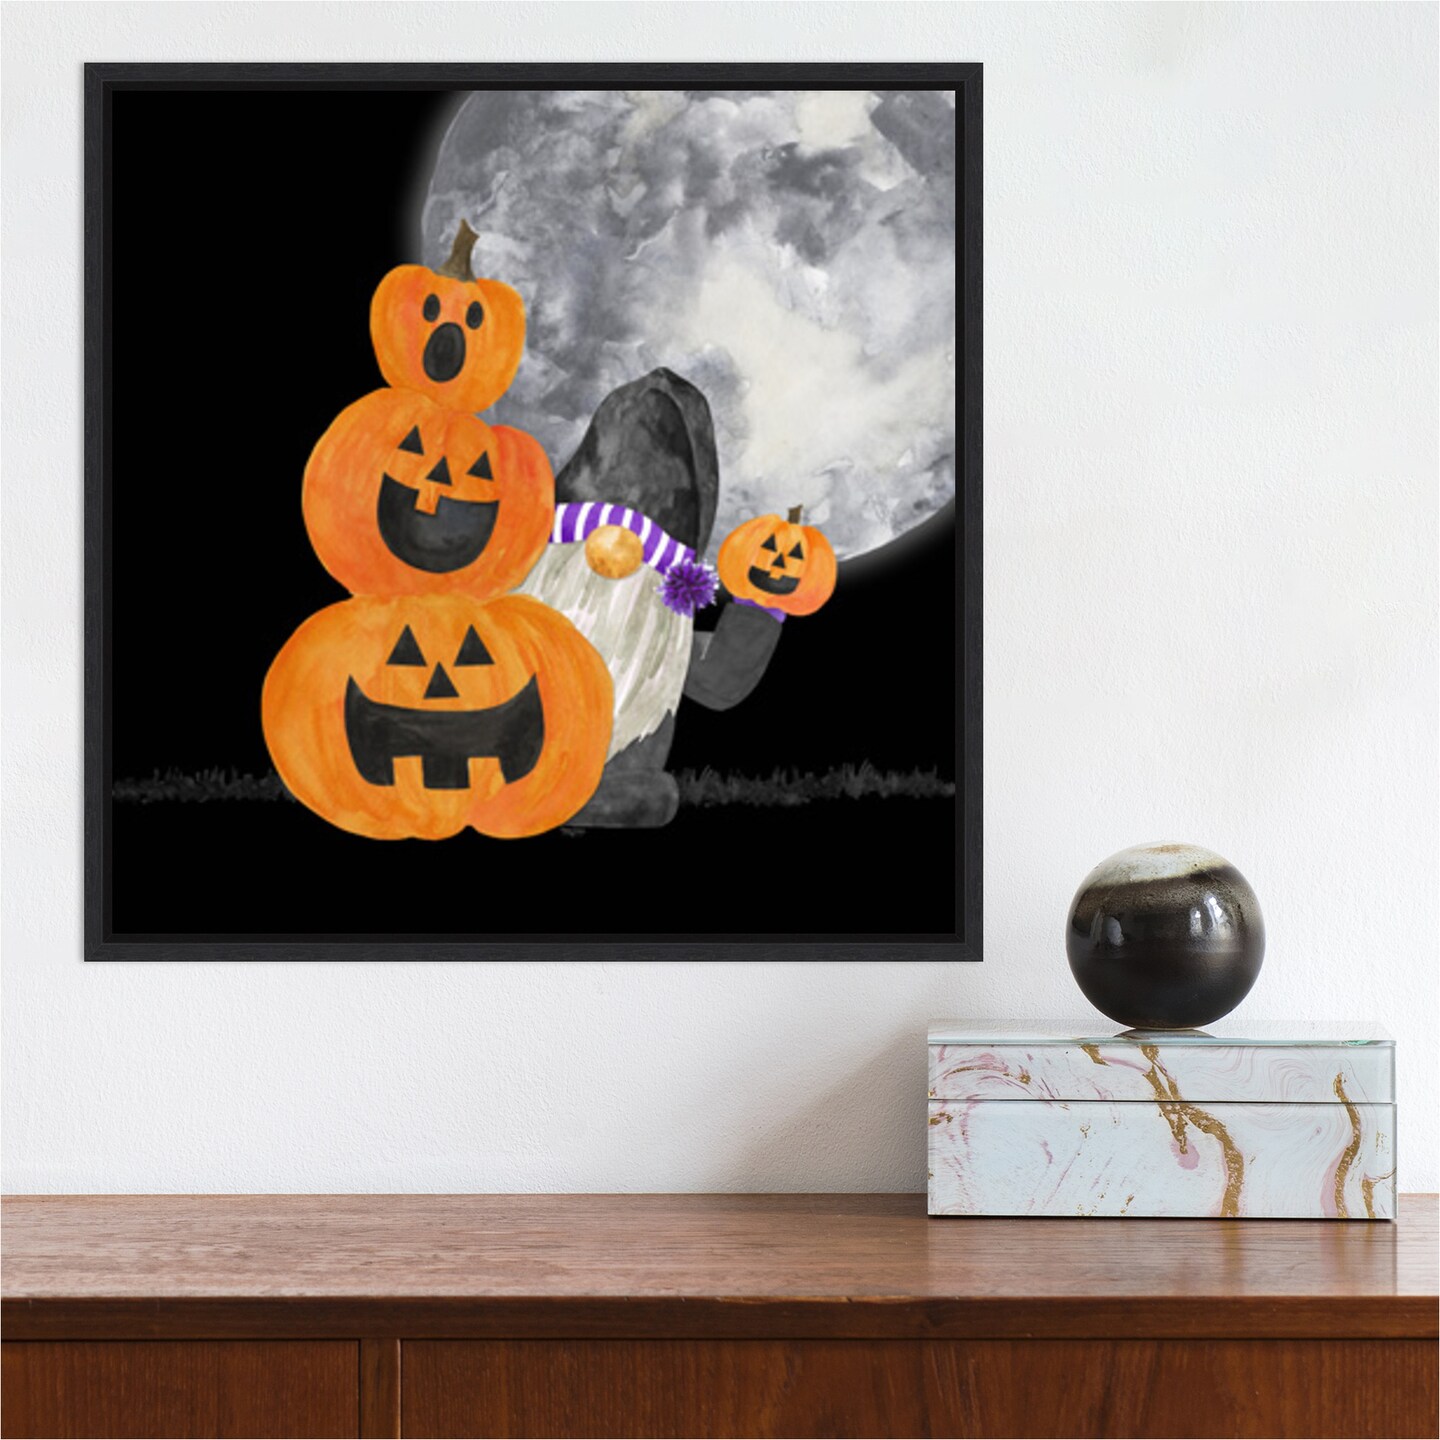 Gnomes of Halloween V-Pumpkins by Tara Reed 16-in. W x 16-in. H. Canvas Wall Art Print Framed in Black